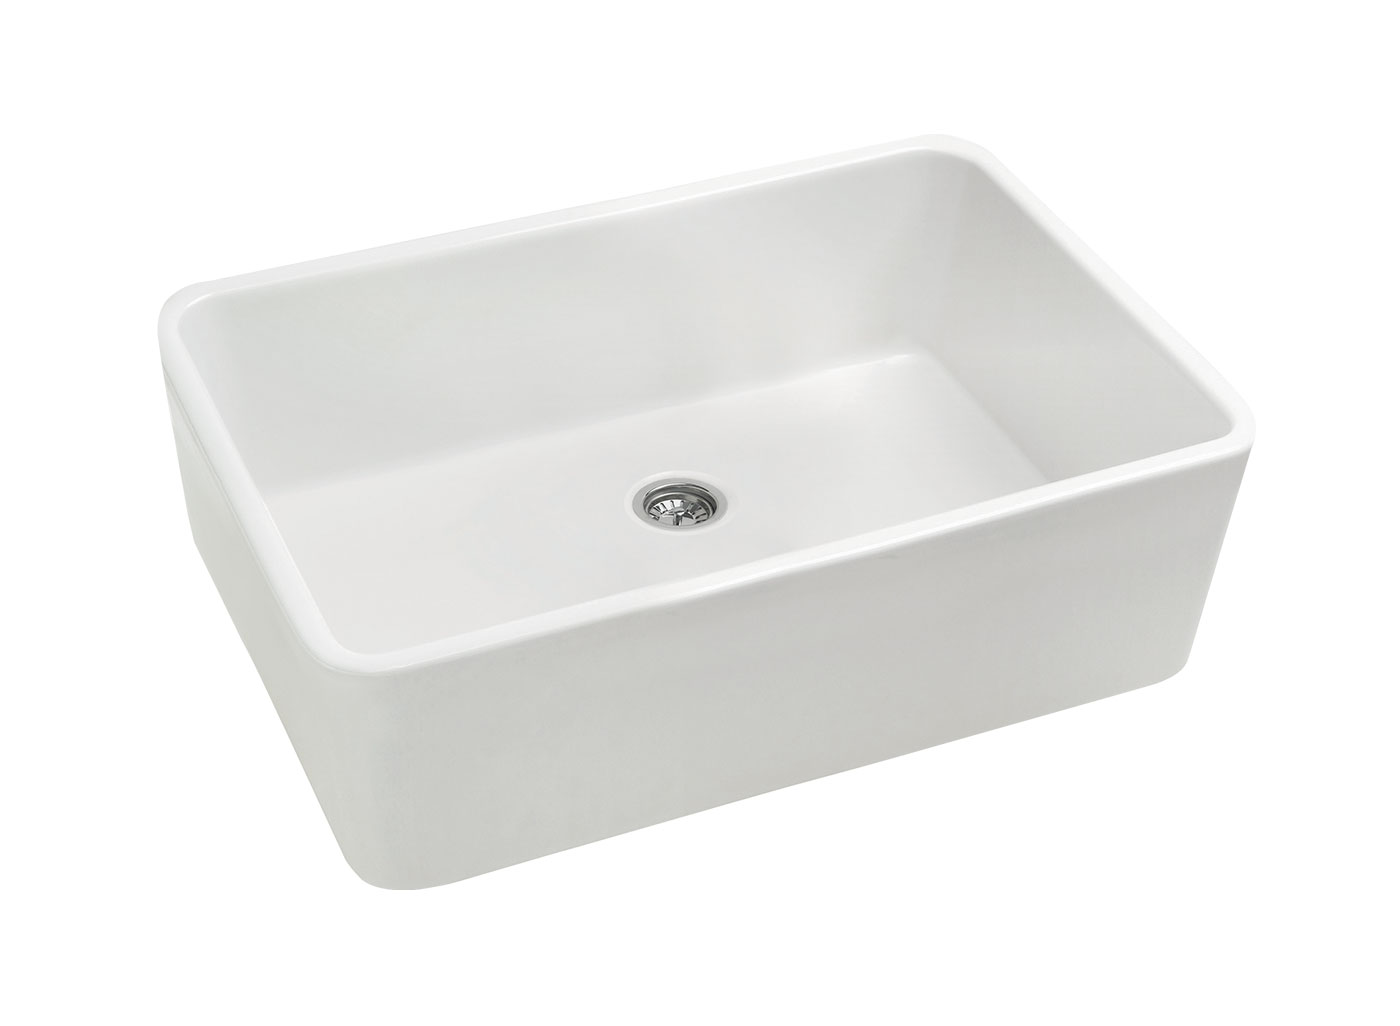 The Galdor sink is the most economical butler style sink we offer - this is because it is made in a more economical way - the edges taper slightly out